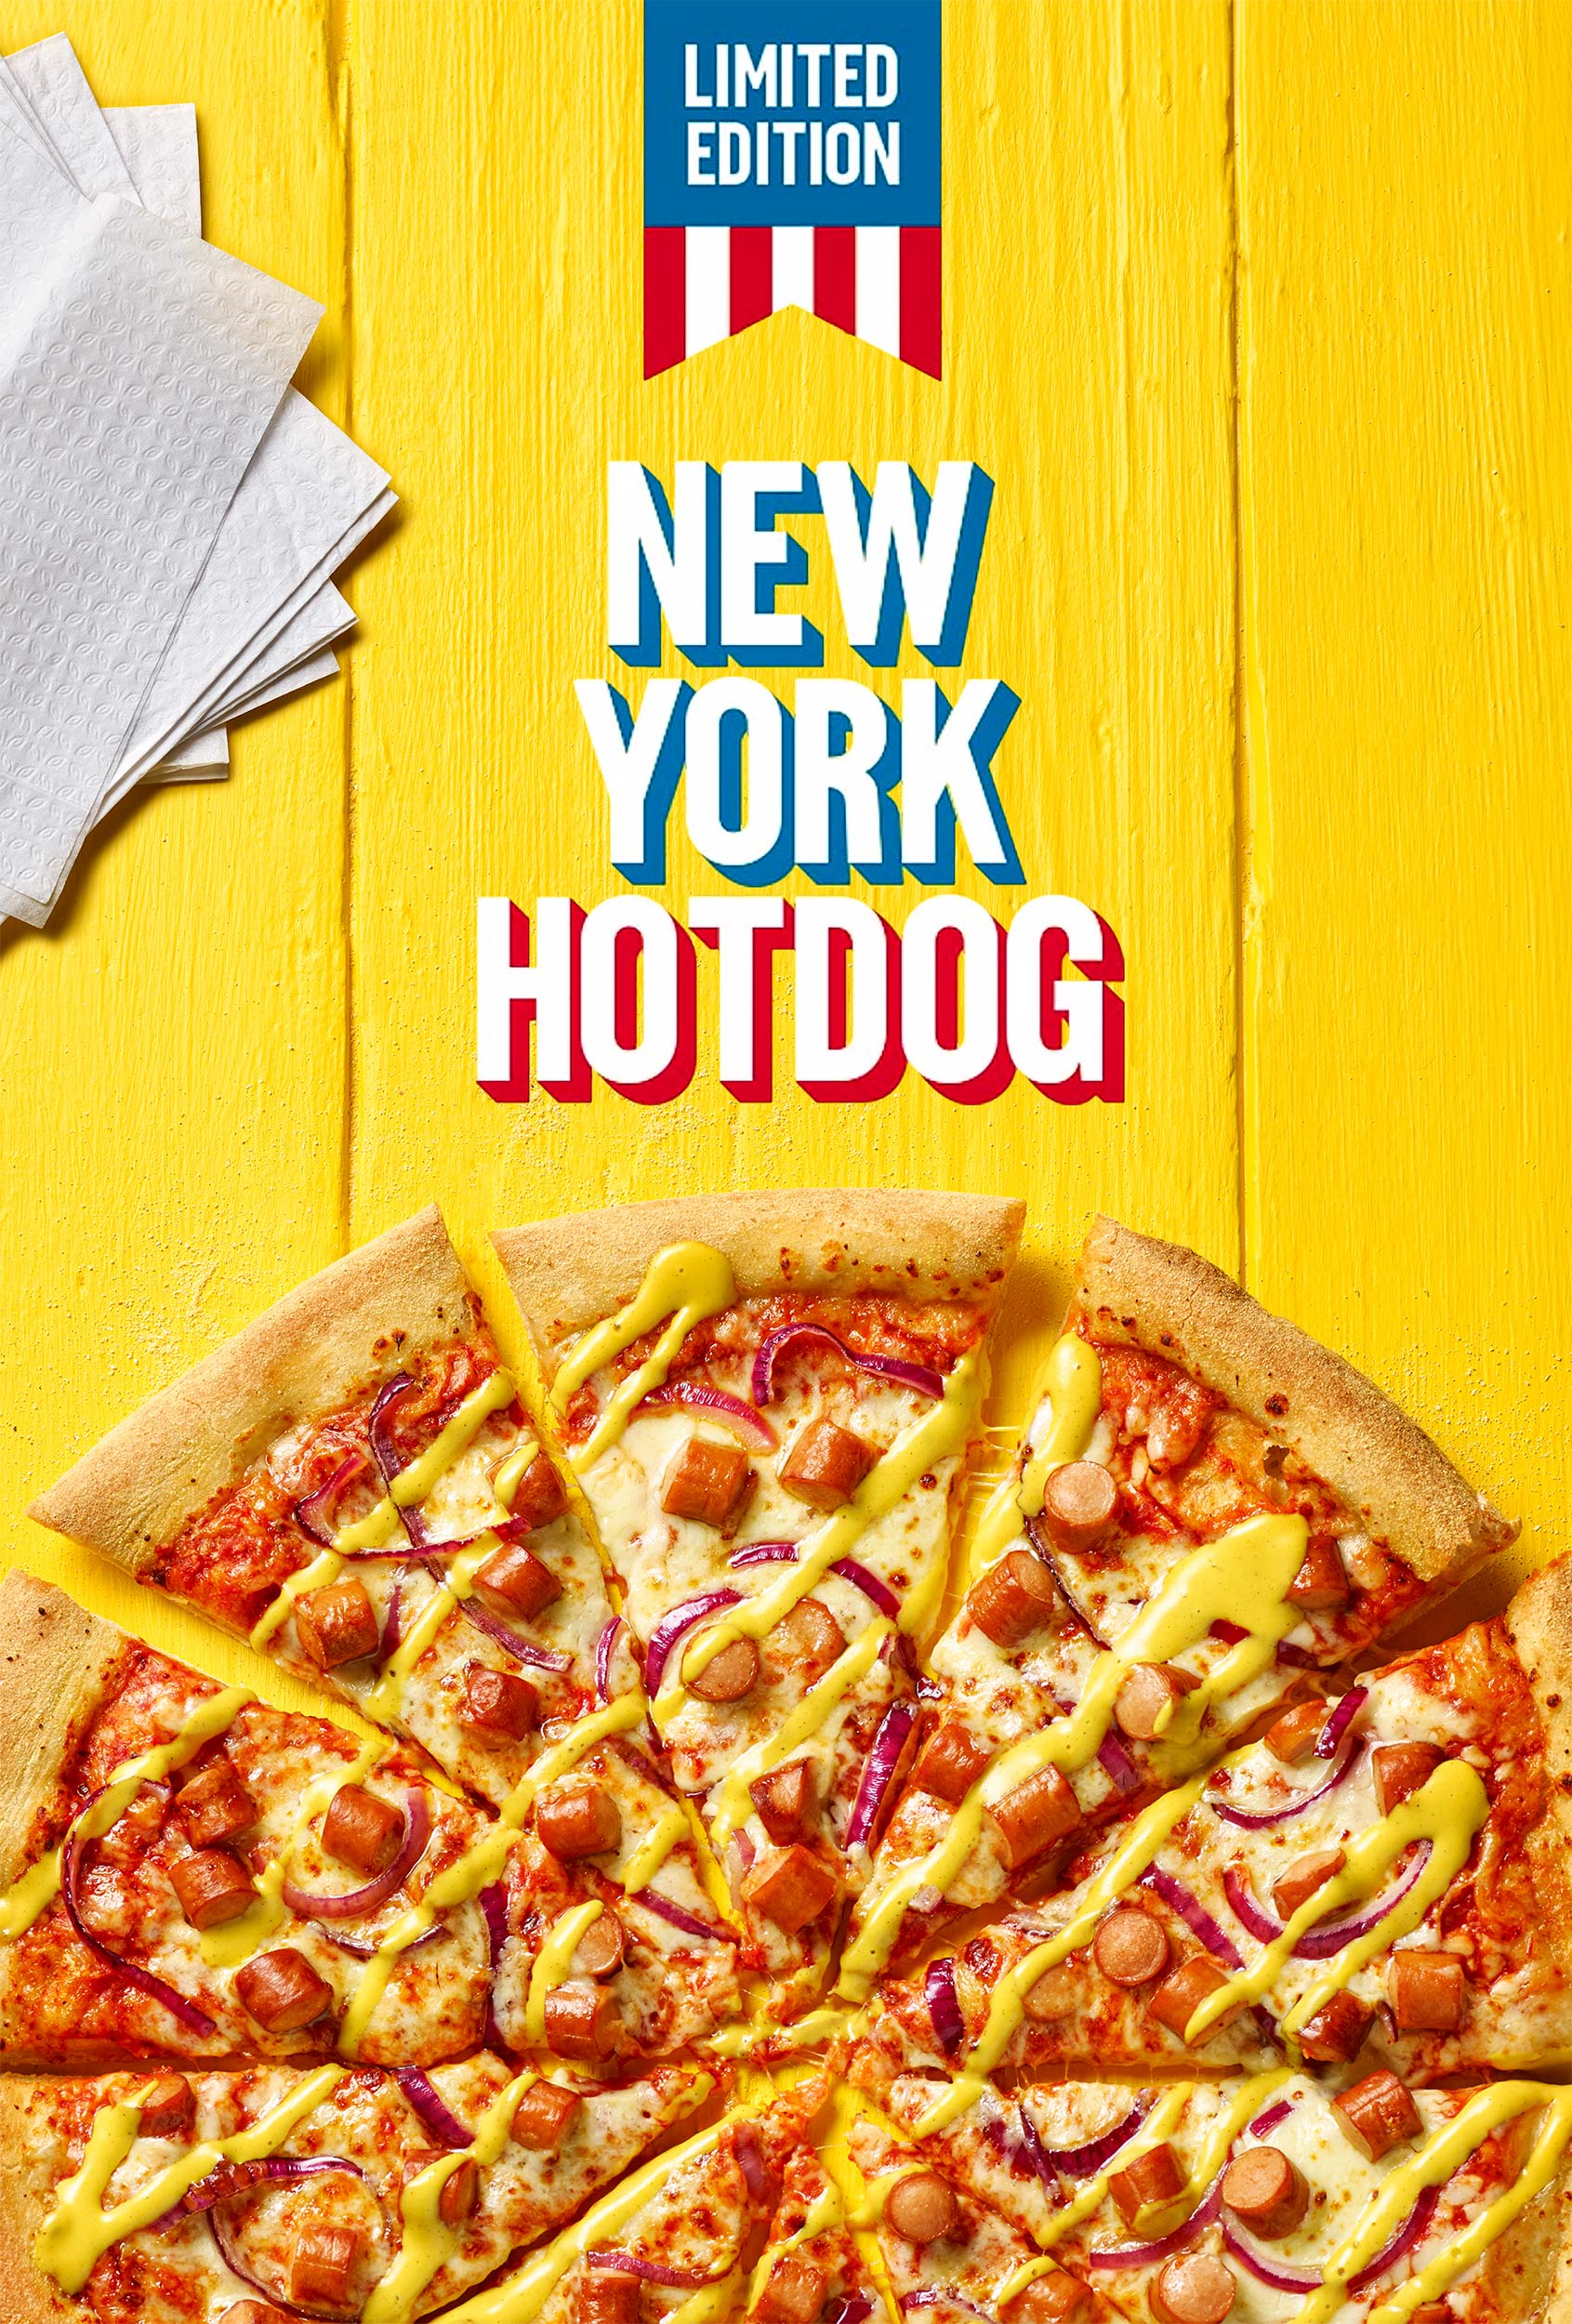 Dominos-Hot-dog_Pizza | Colin Campbell - Food Photographer